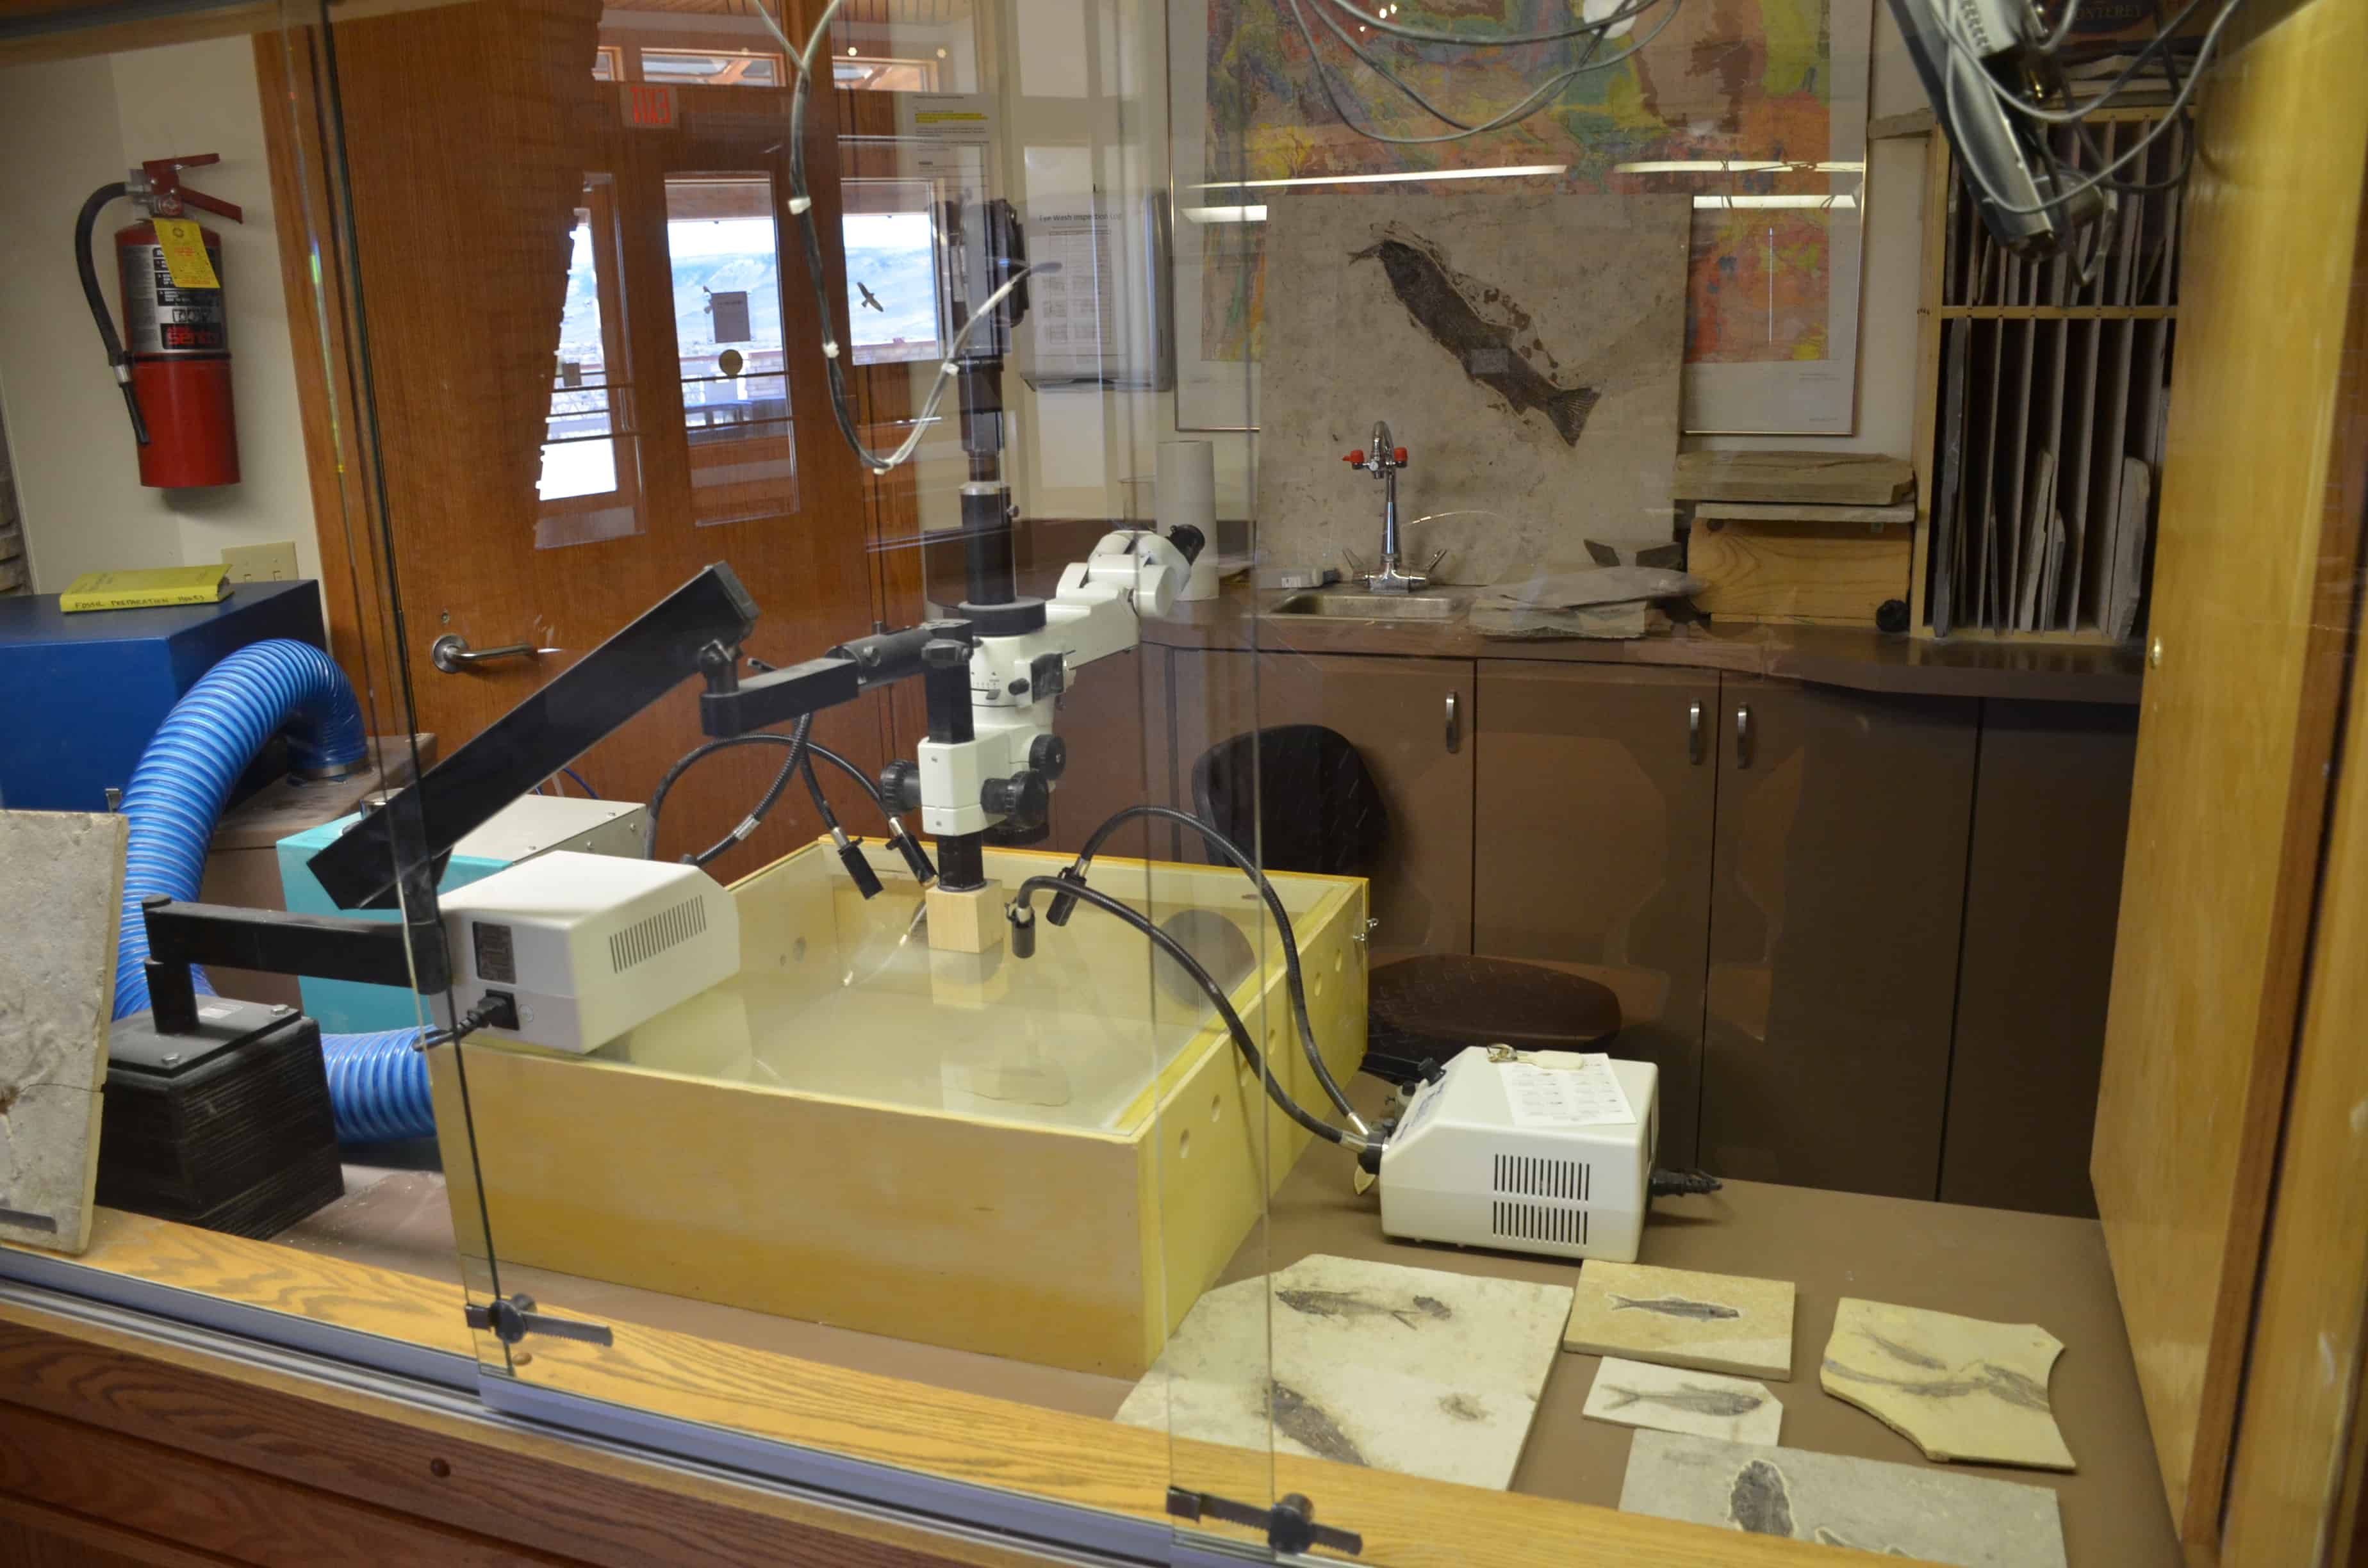 Lab in the visitor center